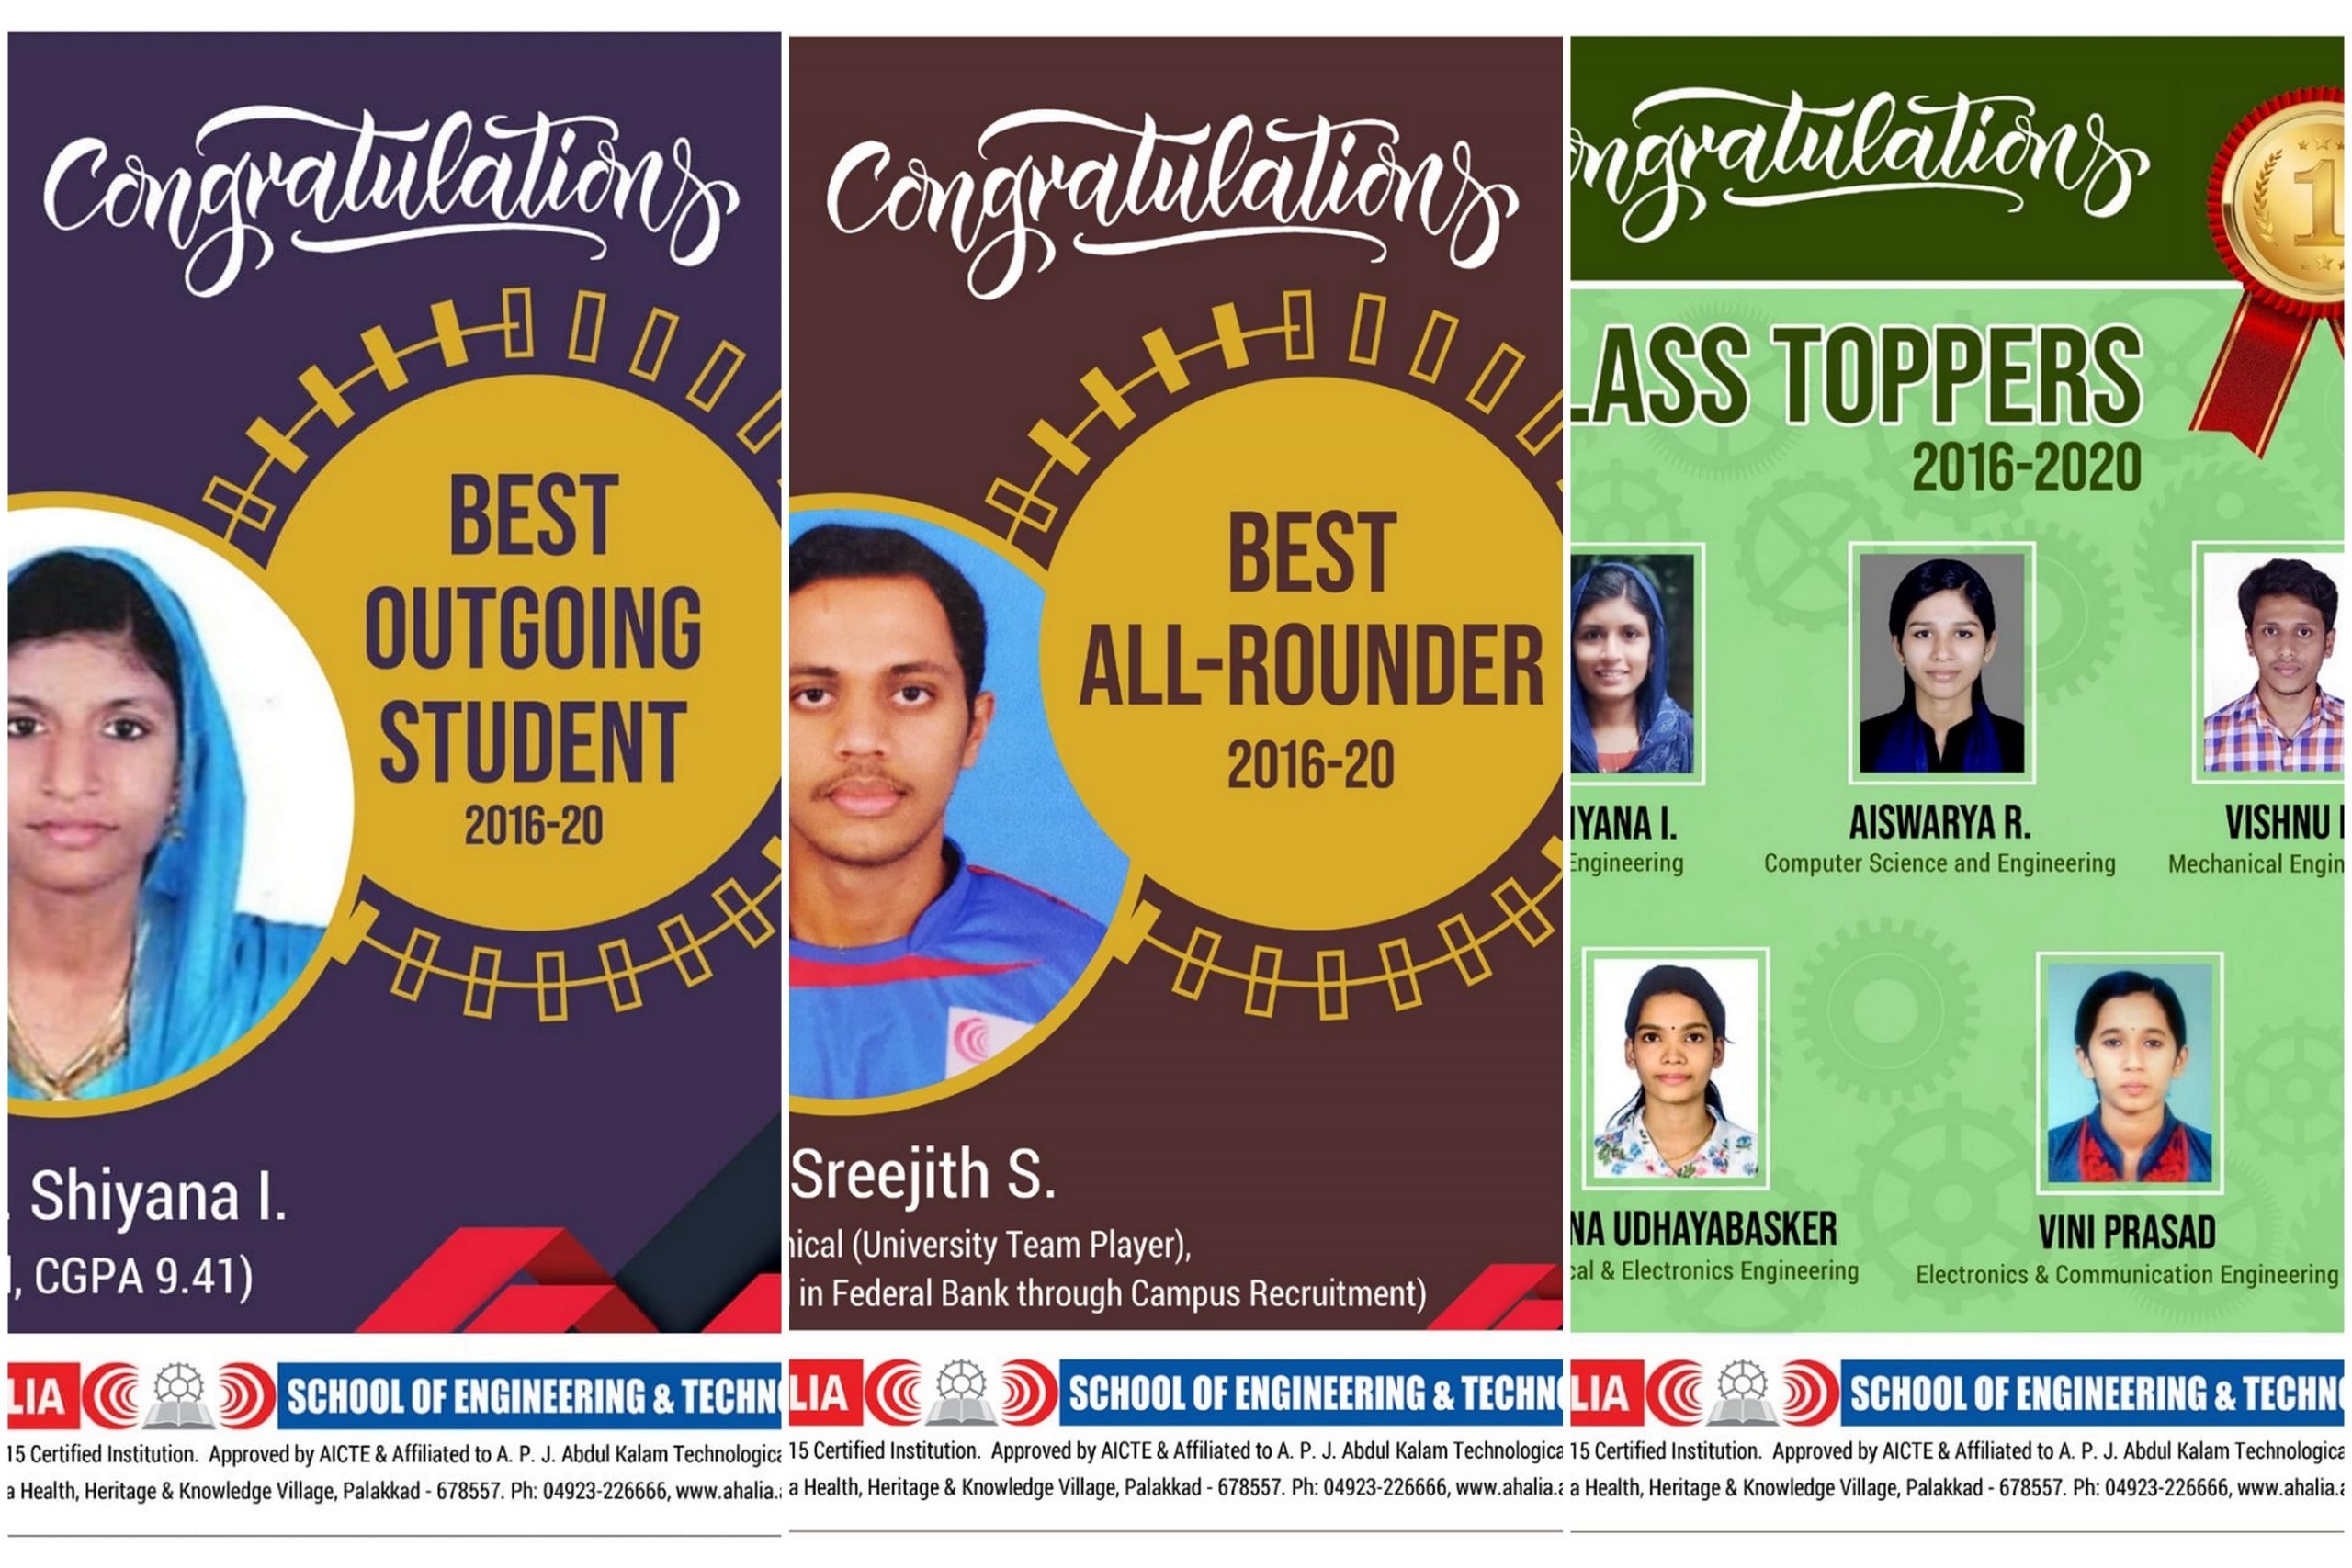 Best Outgoing, Best All-Rounder and Class Toppers – 2020